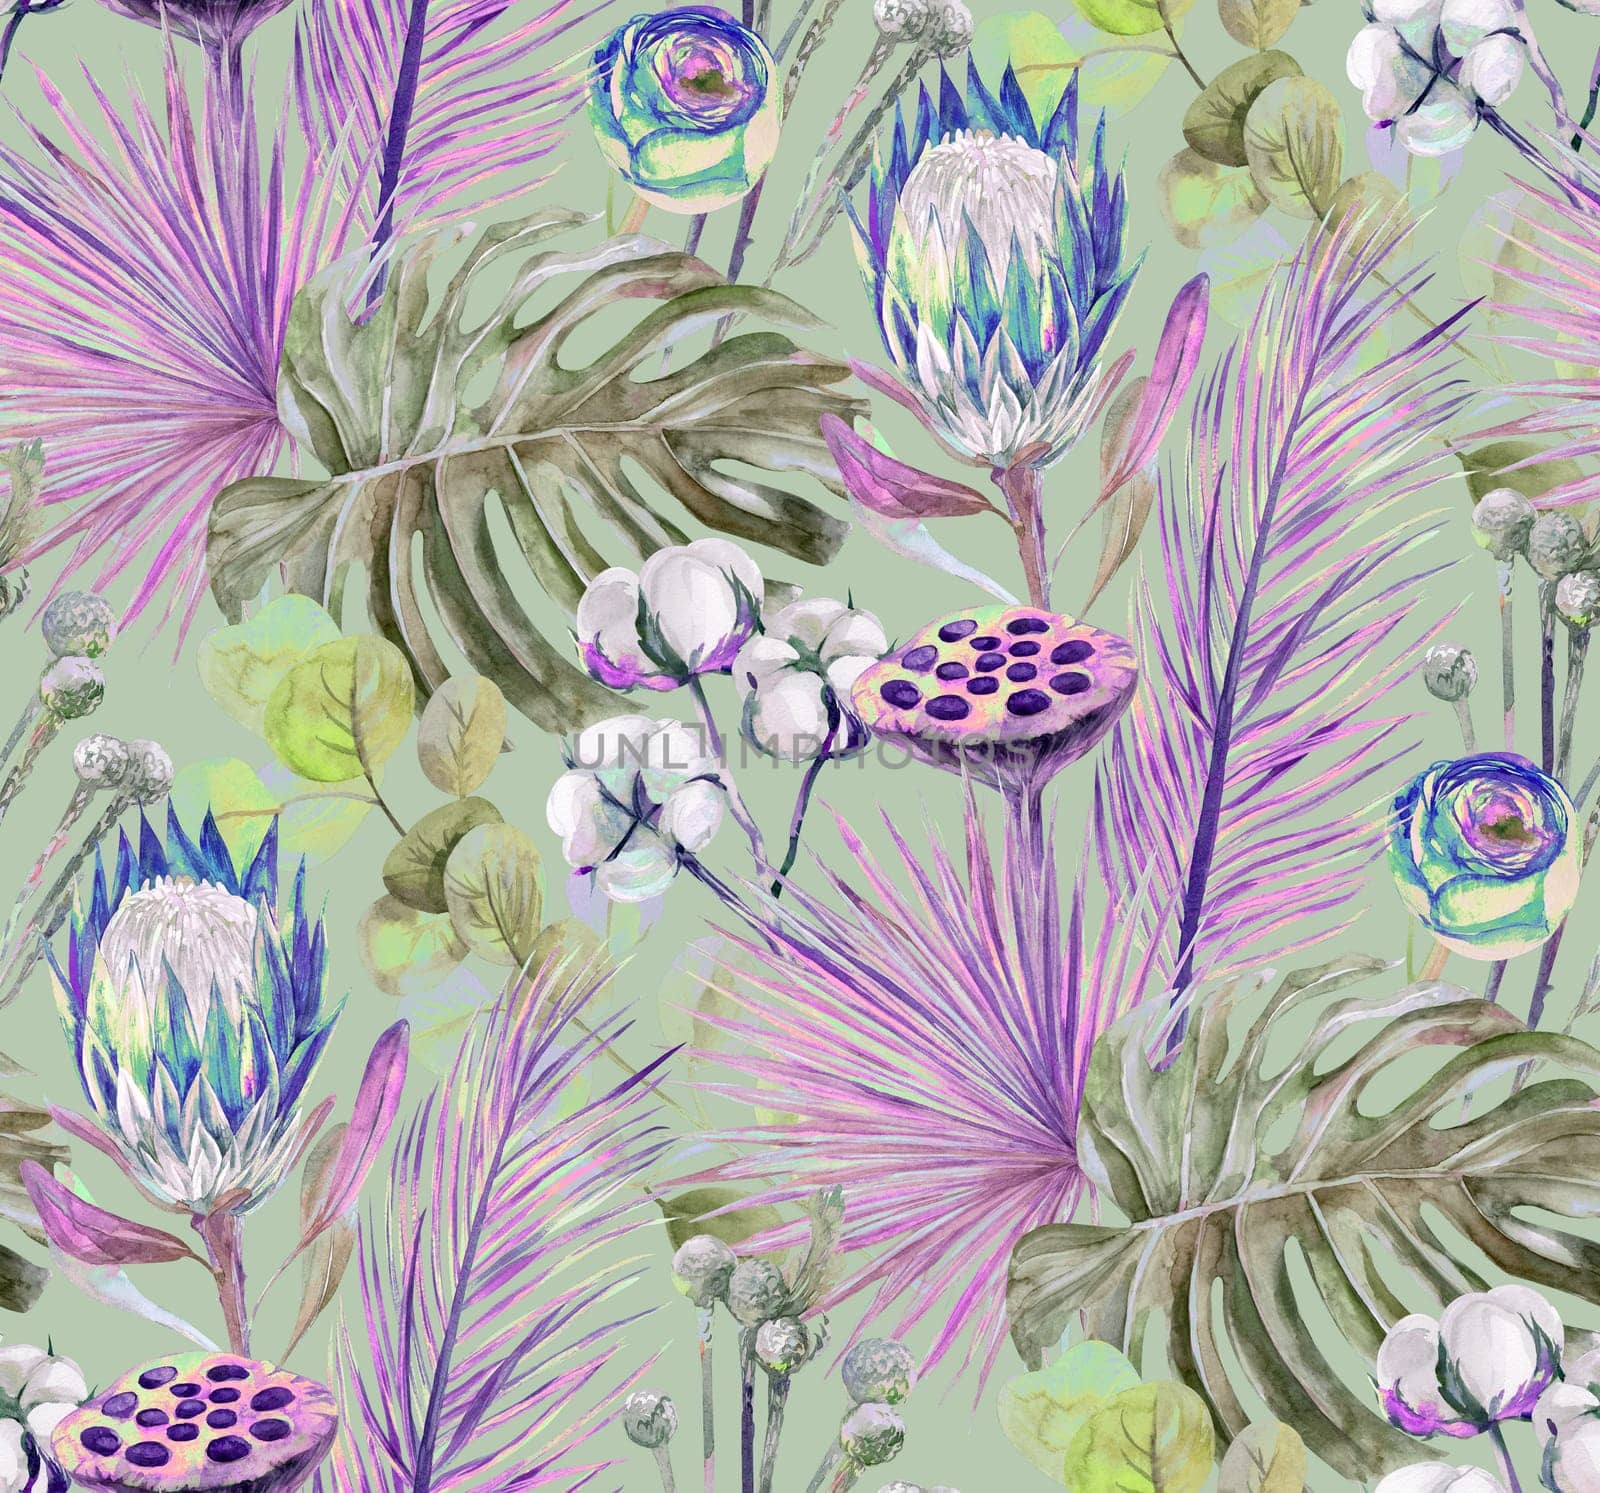 Watercolor modern pattern with tropical dried flowers of protea flowers and monstera leaves on a green background. Contemporary dyed dried flowers and Eucalyptus twigs and dried tropical palm leaves in shades of blue and purple for summer textiles and surface designs